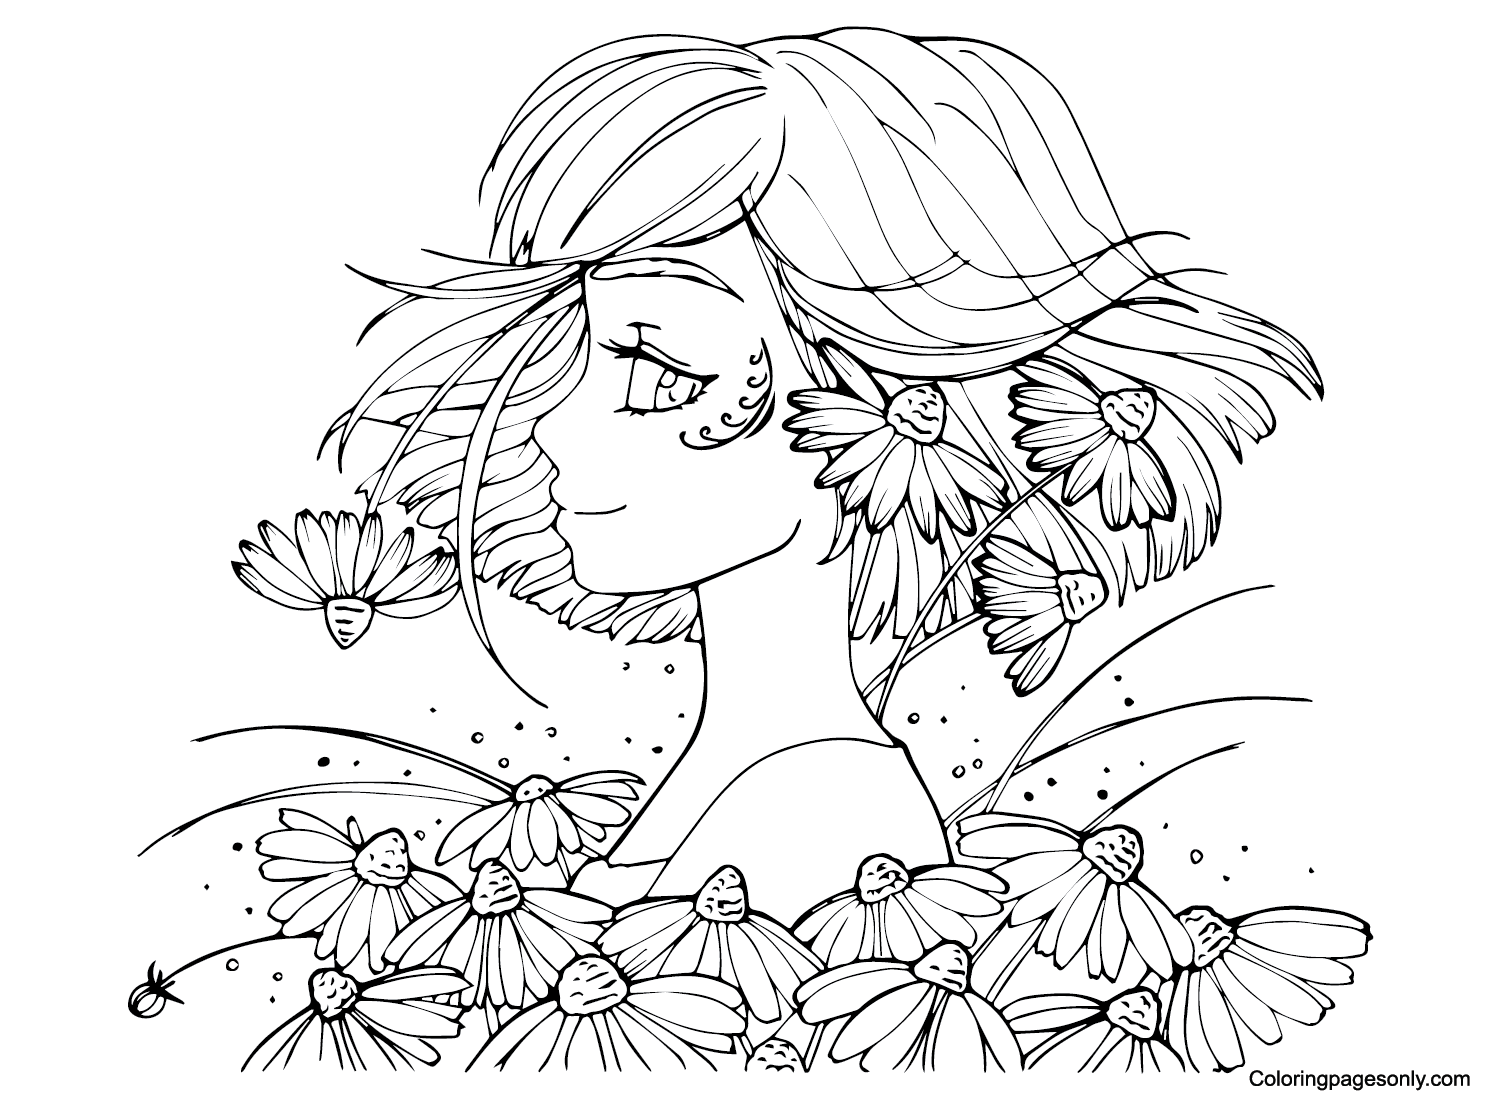 Teenage Girl with Flowers Coloring Page